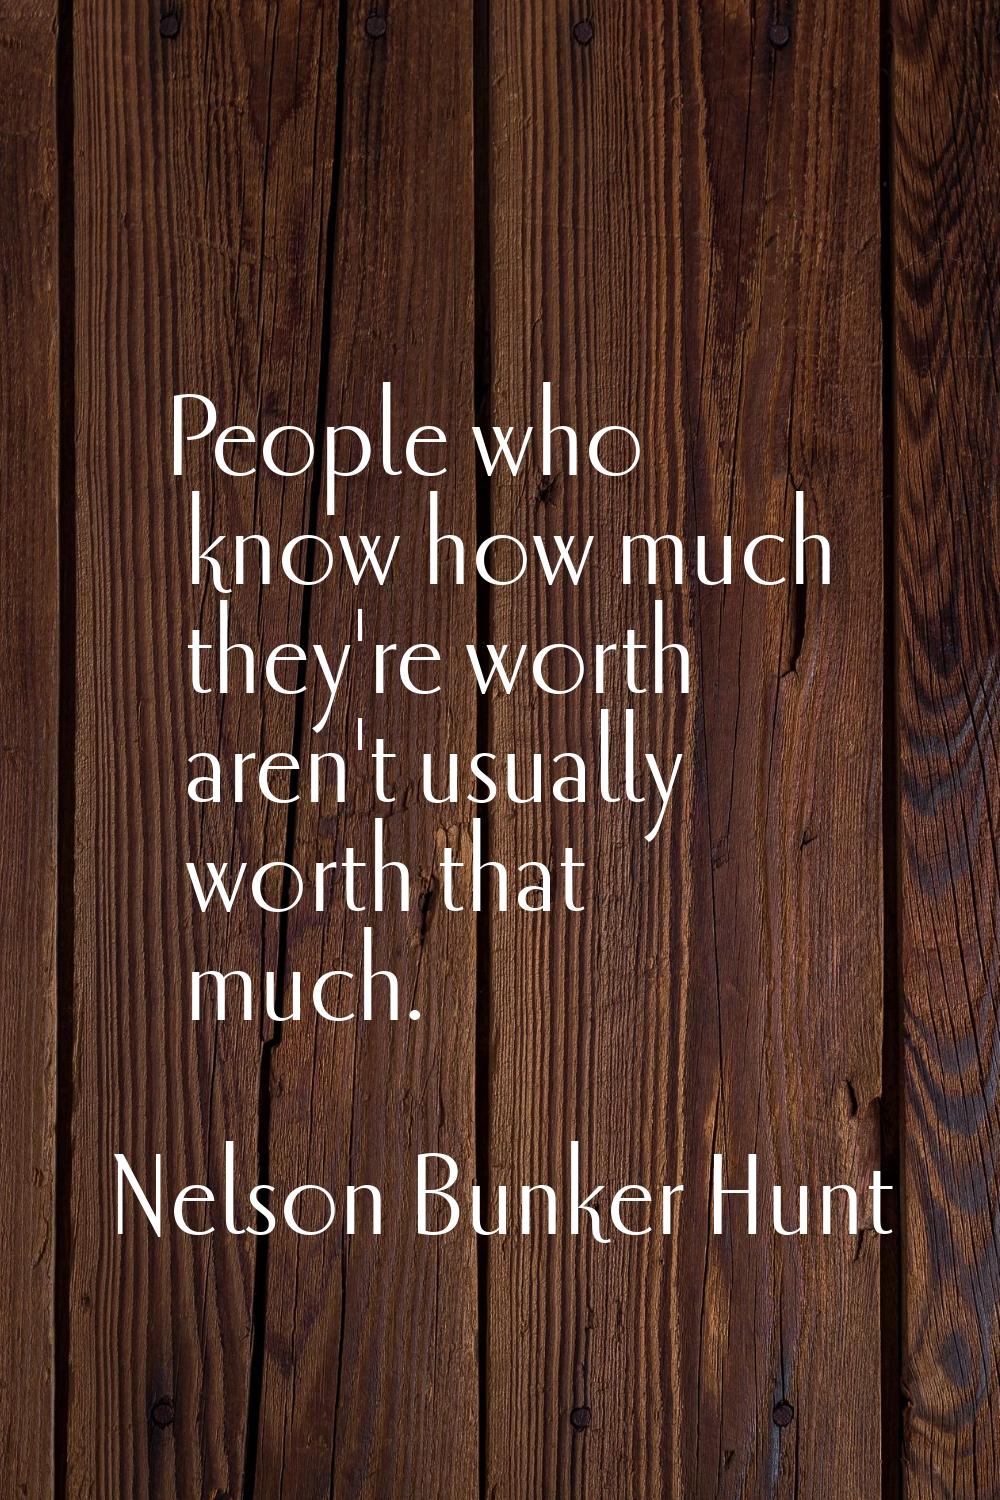 People who know how much they're worth aren't usually worth that much.